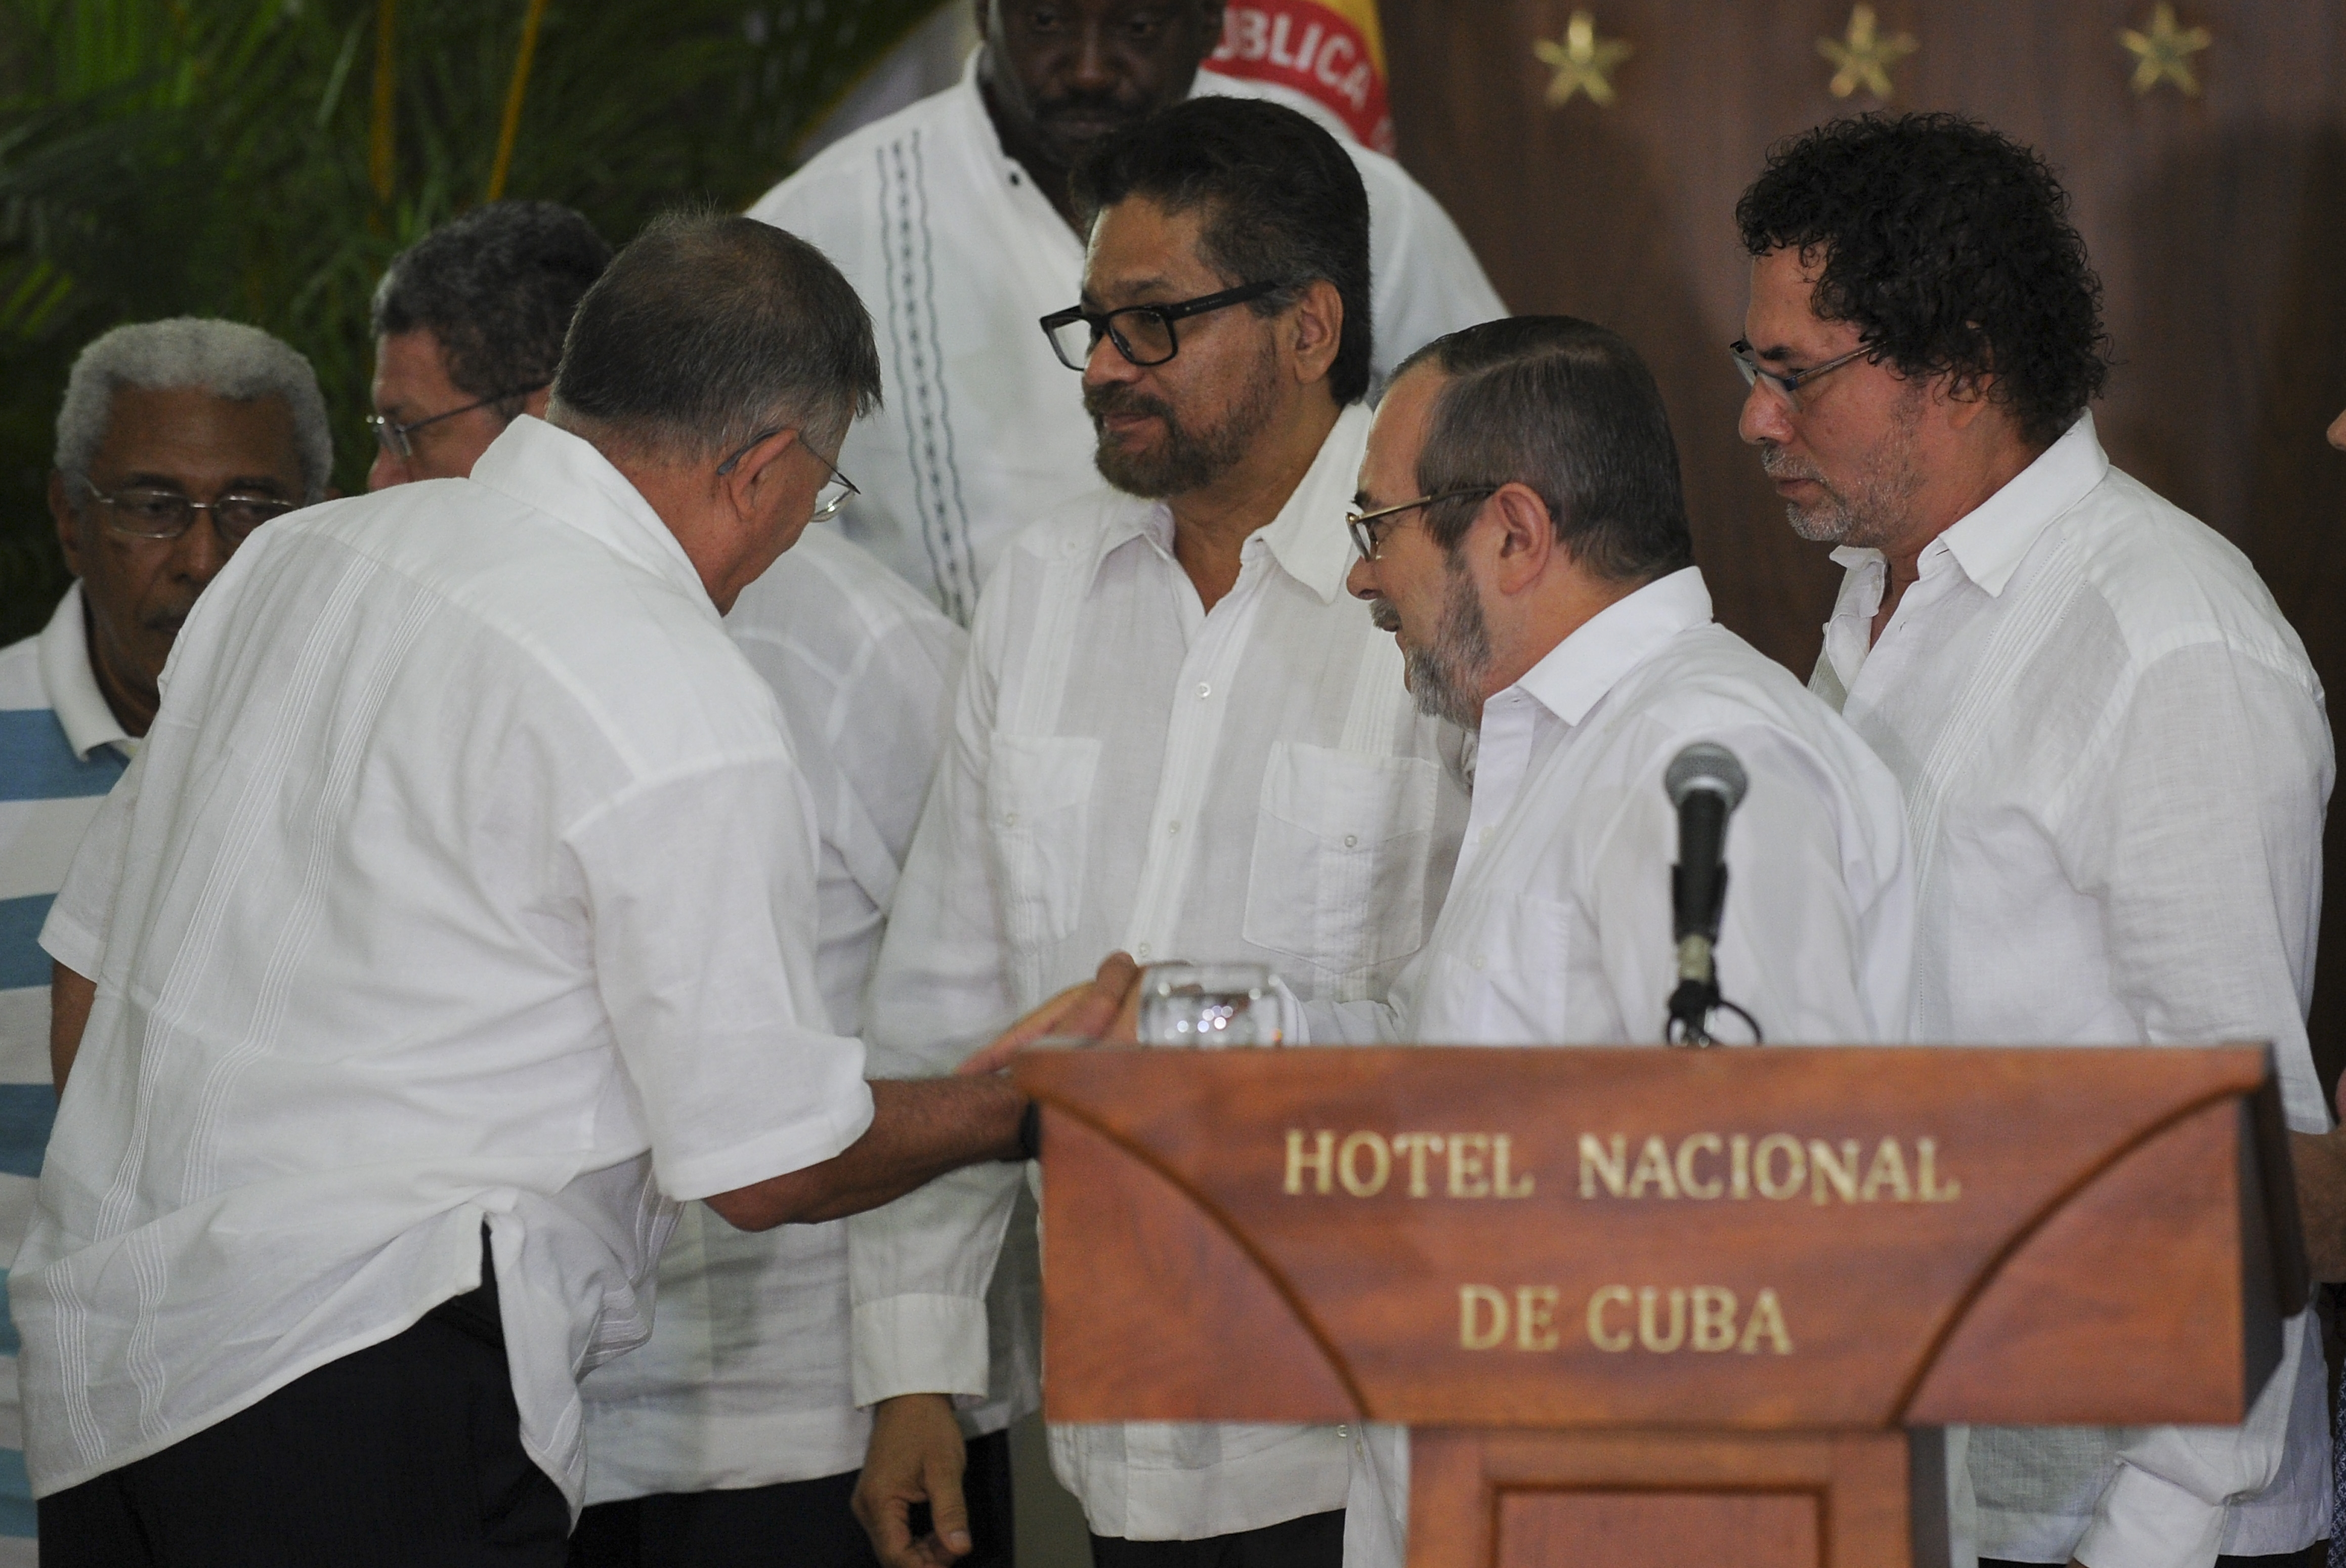 The head of Colombia's FARC guerrilla, Timoleon Jimenez, aka "Timochenko" (2nd-R), greets commanders Rodrigo Granda (R), Ivan Marquez (C) and Pastor Alape (R) during a press conference in Havana on  August 28, 2016.  Colombia's FARC rebel force ordered a definitive ceasefire late Sunday as part of an accord to end 52 years of conflict with the government. / AFP PHOTO / YAMIL LAGE